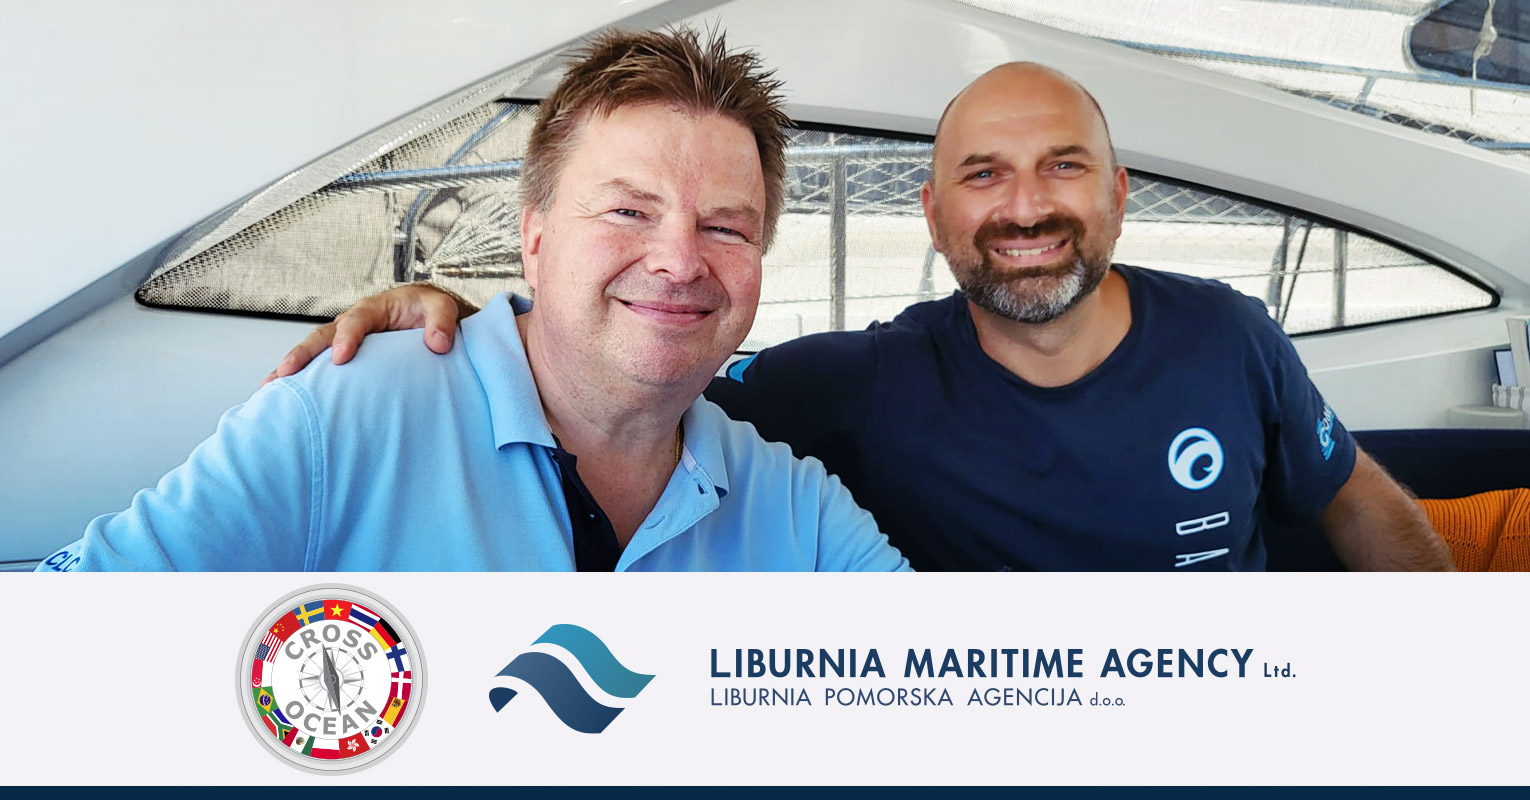 Cross Ocean's Chairman met with Marin Skufca, CEO of Liburnia Maritime Agency